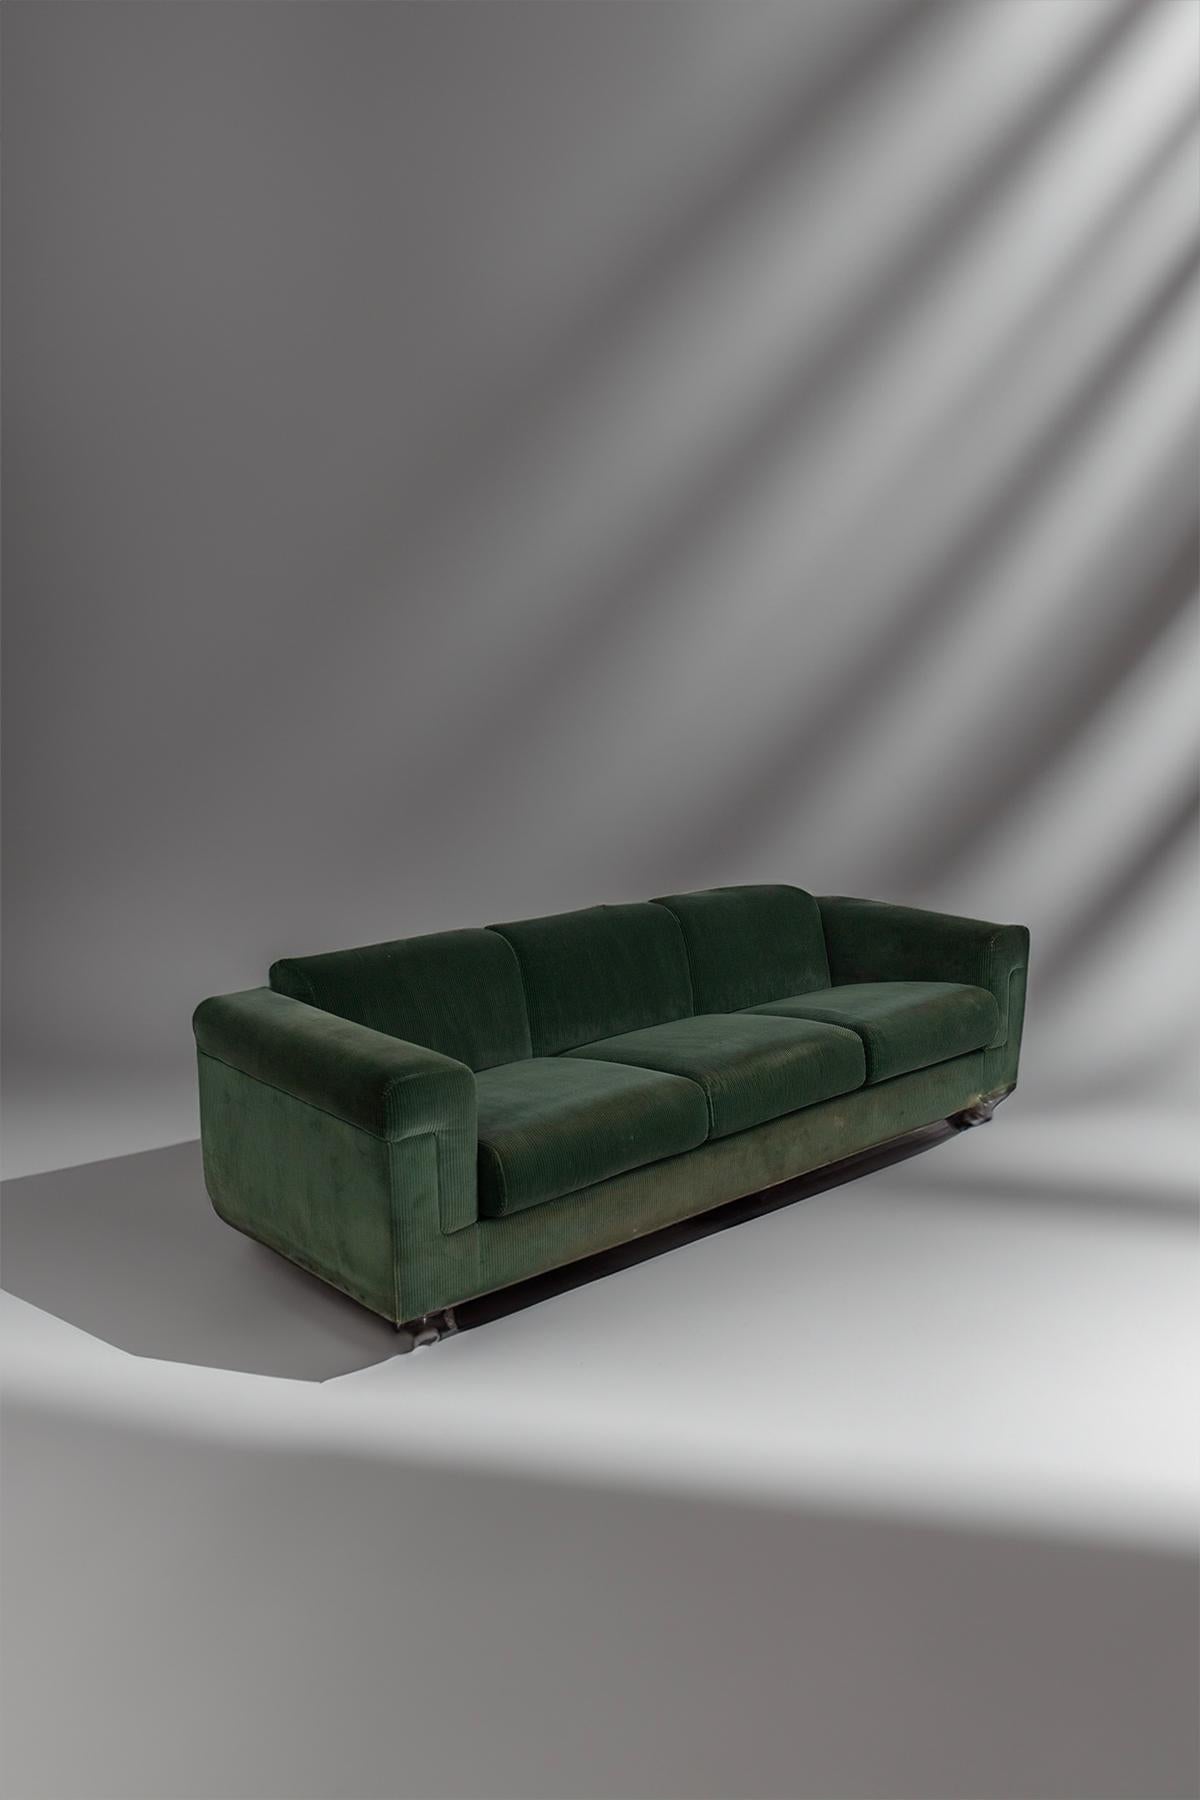 There exists a piece of furniture that embodies the spirit of the 1970s with unparalleled elegance—the Valeria Borsani and Alfredo Bonetti 'D120' sofa for Tecno. Crafted with meticulous attention to detail and infused with a sense of timeless